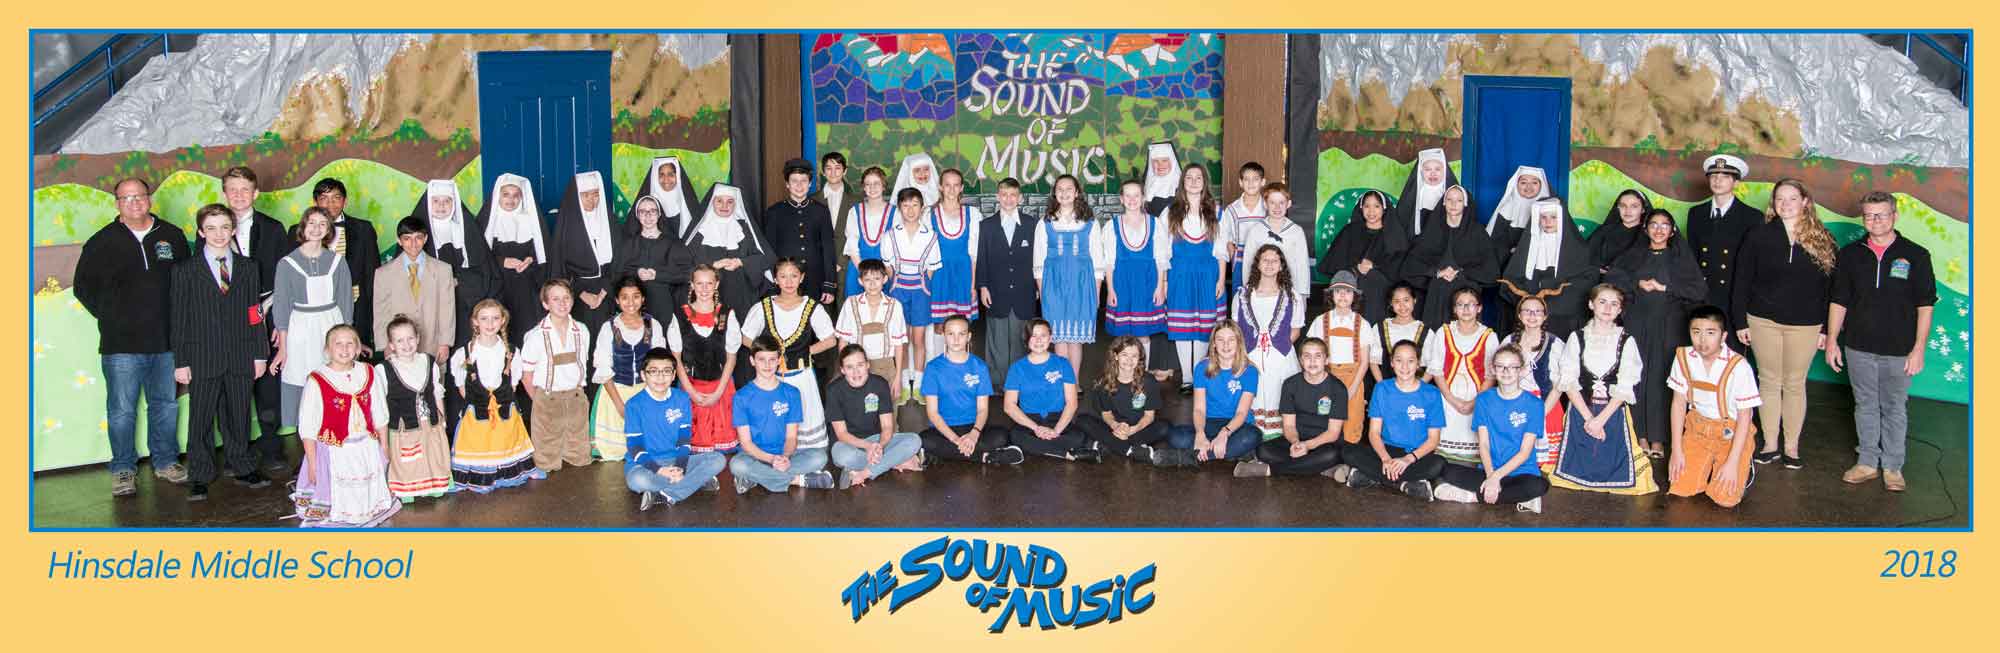 Hinsdale Sound of Music Theater Group Photo by Tom Killoran